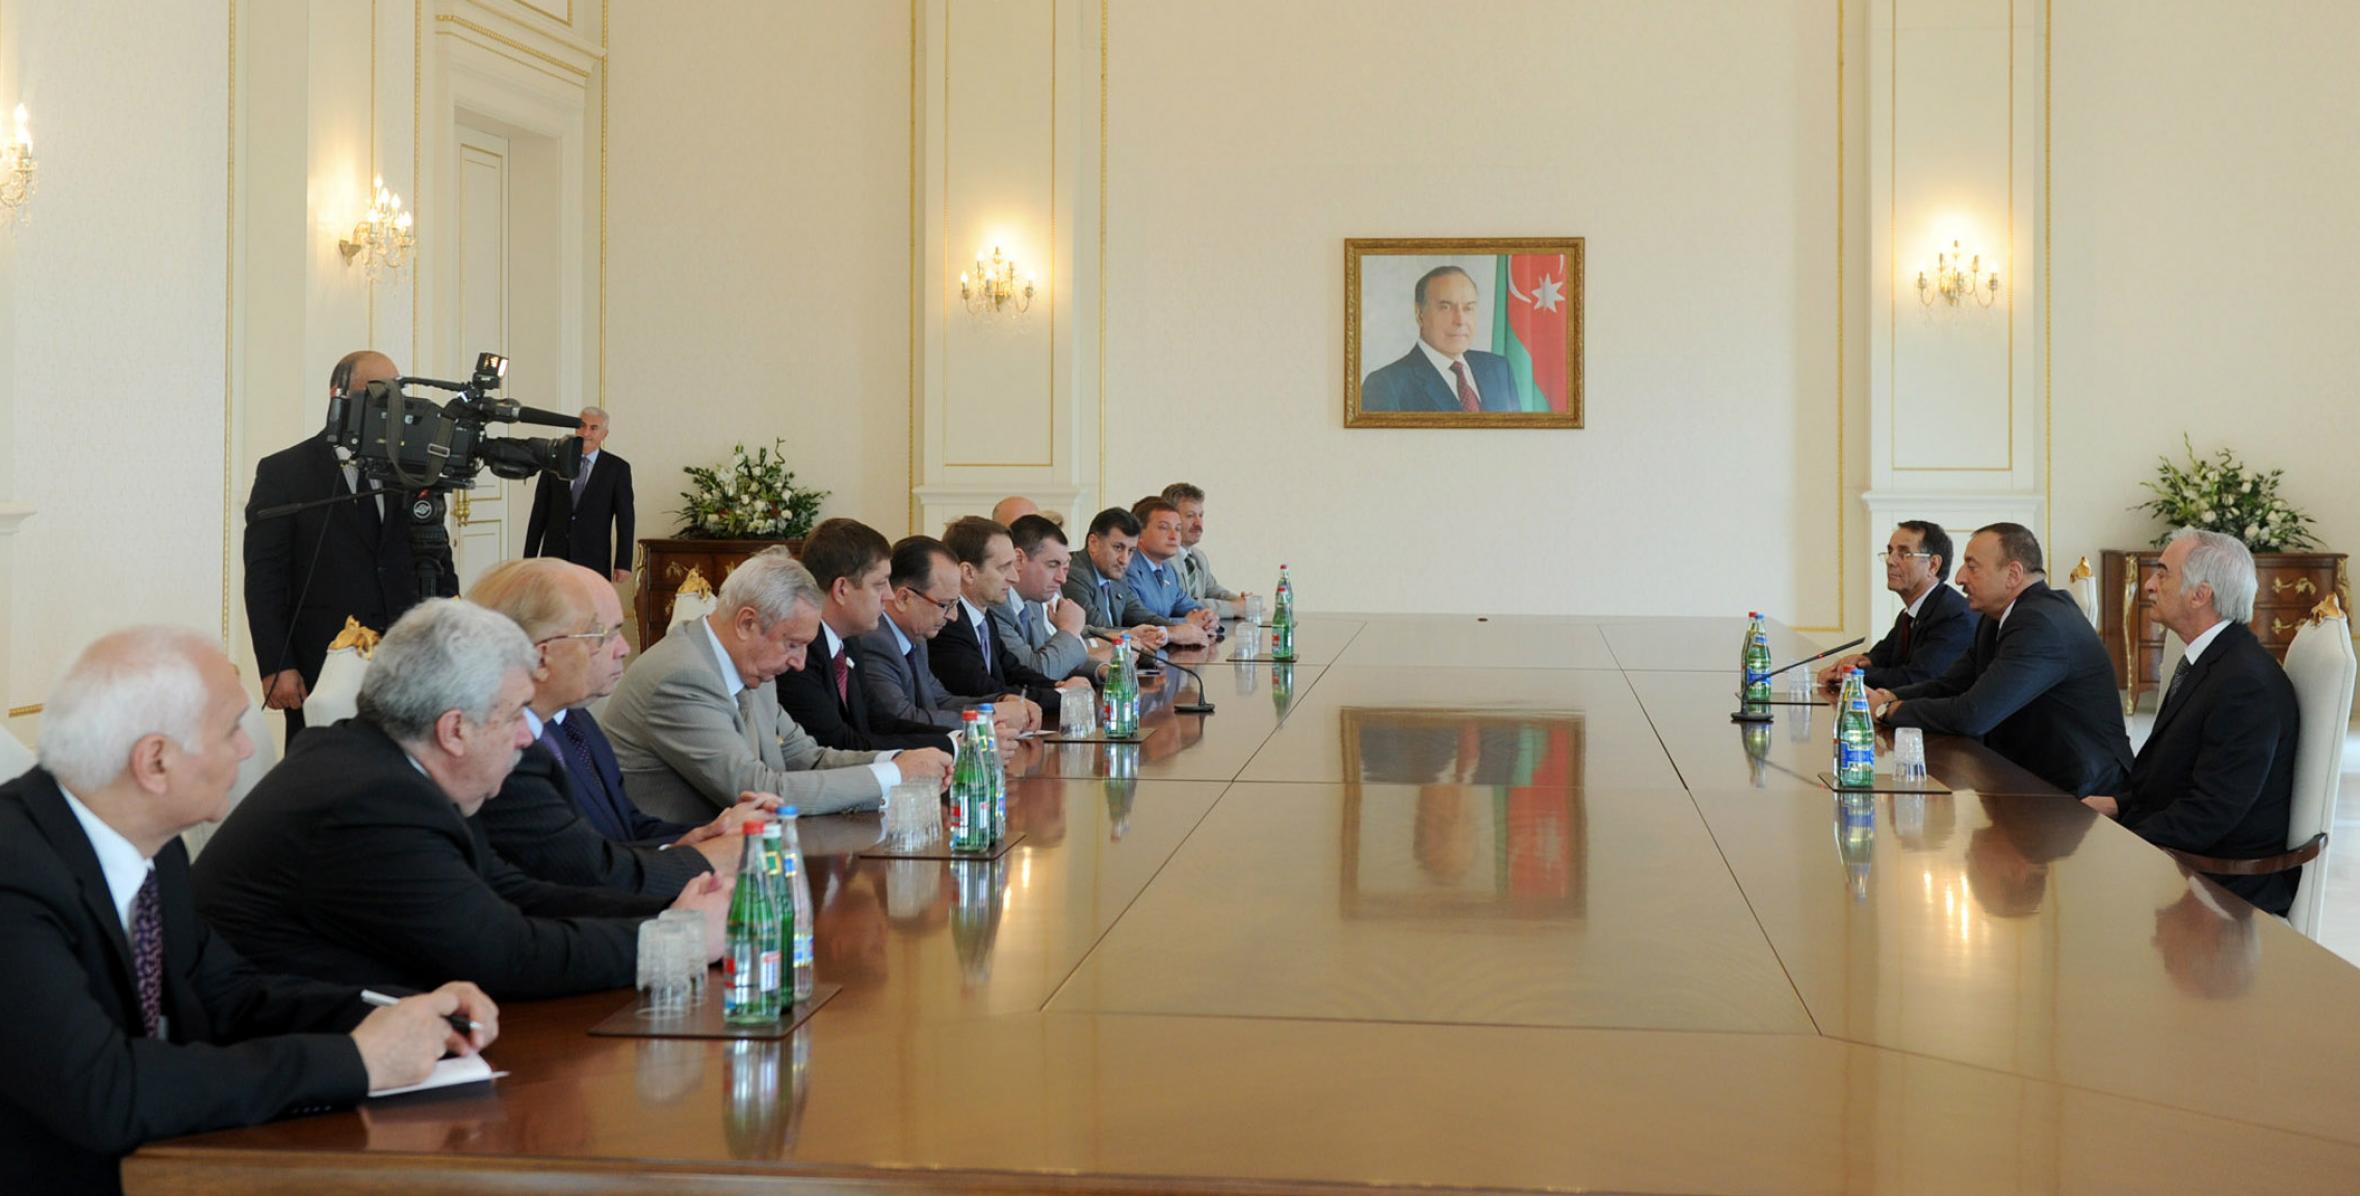 Ilham Aliyev received a delegation led by the Chairman of the Russian State Duma, Sergey Naryshkin